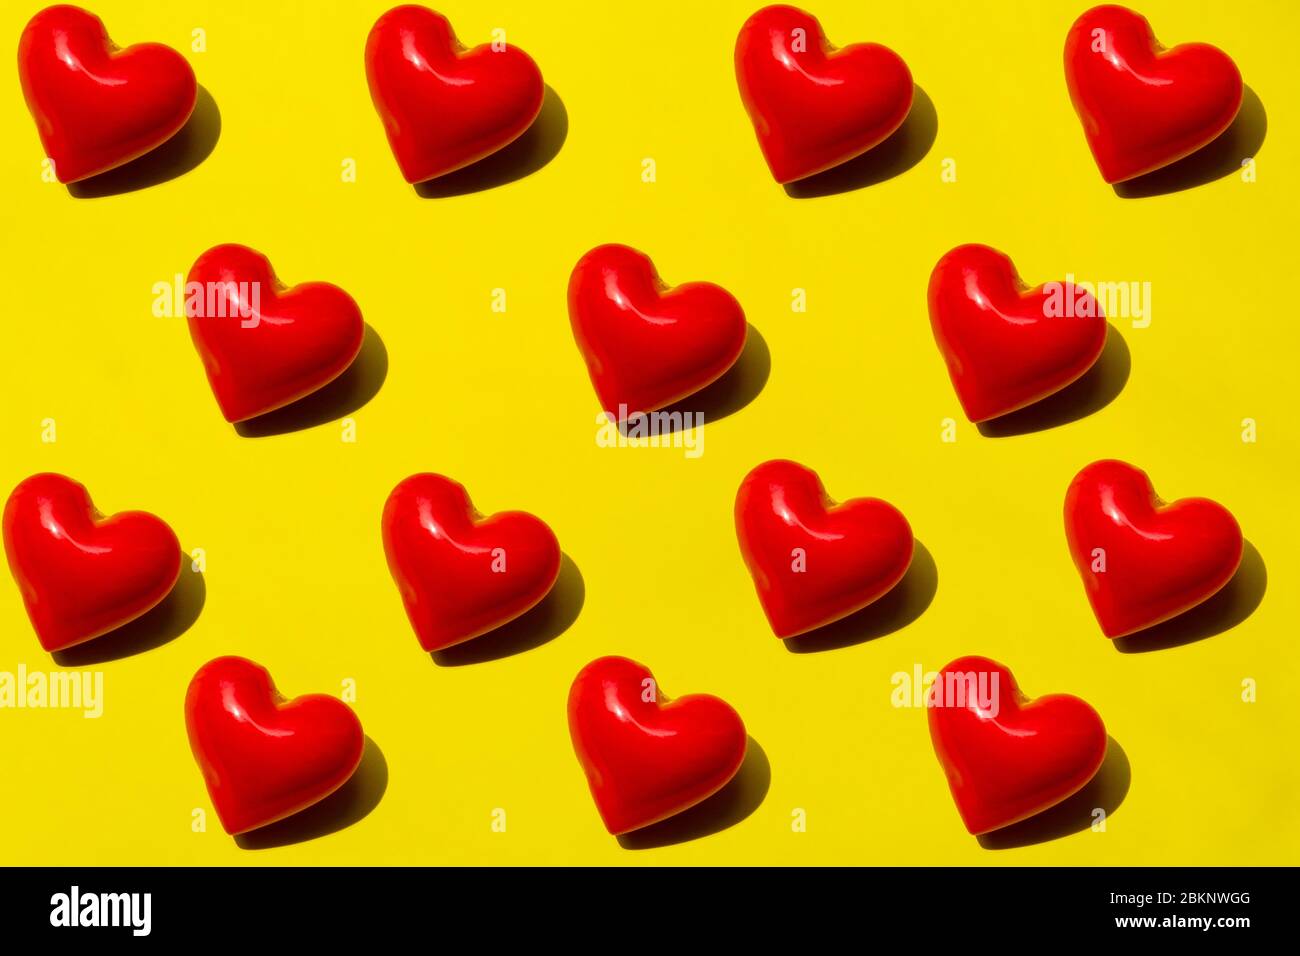 Seamless Red hearts pattern on yellow background. Top view, flat lay, layout. Romantic colorful pattern. Stock Photo